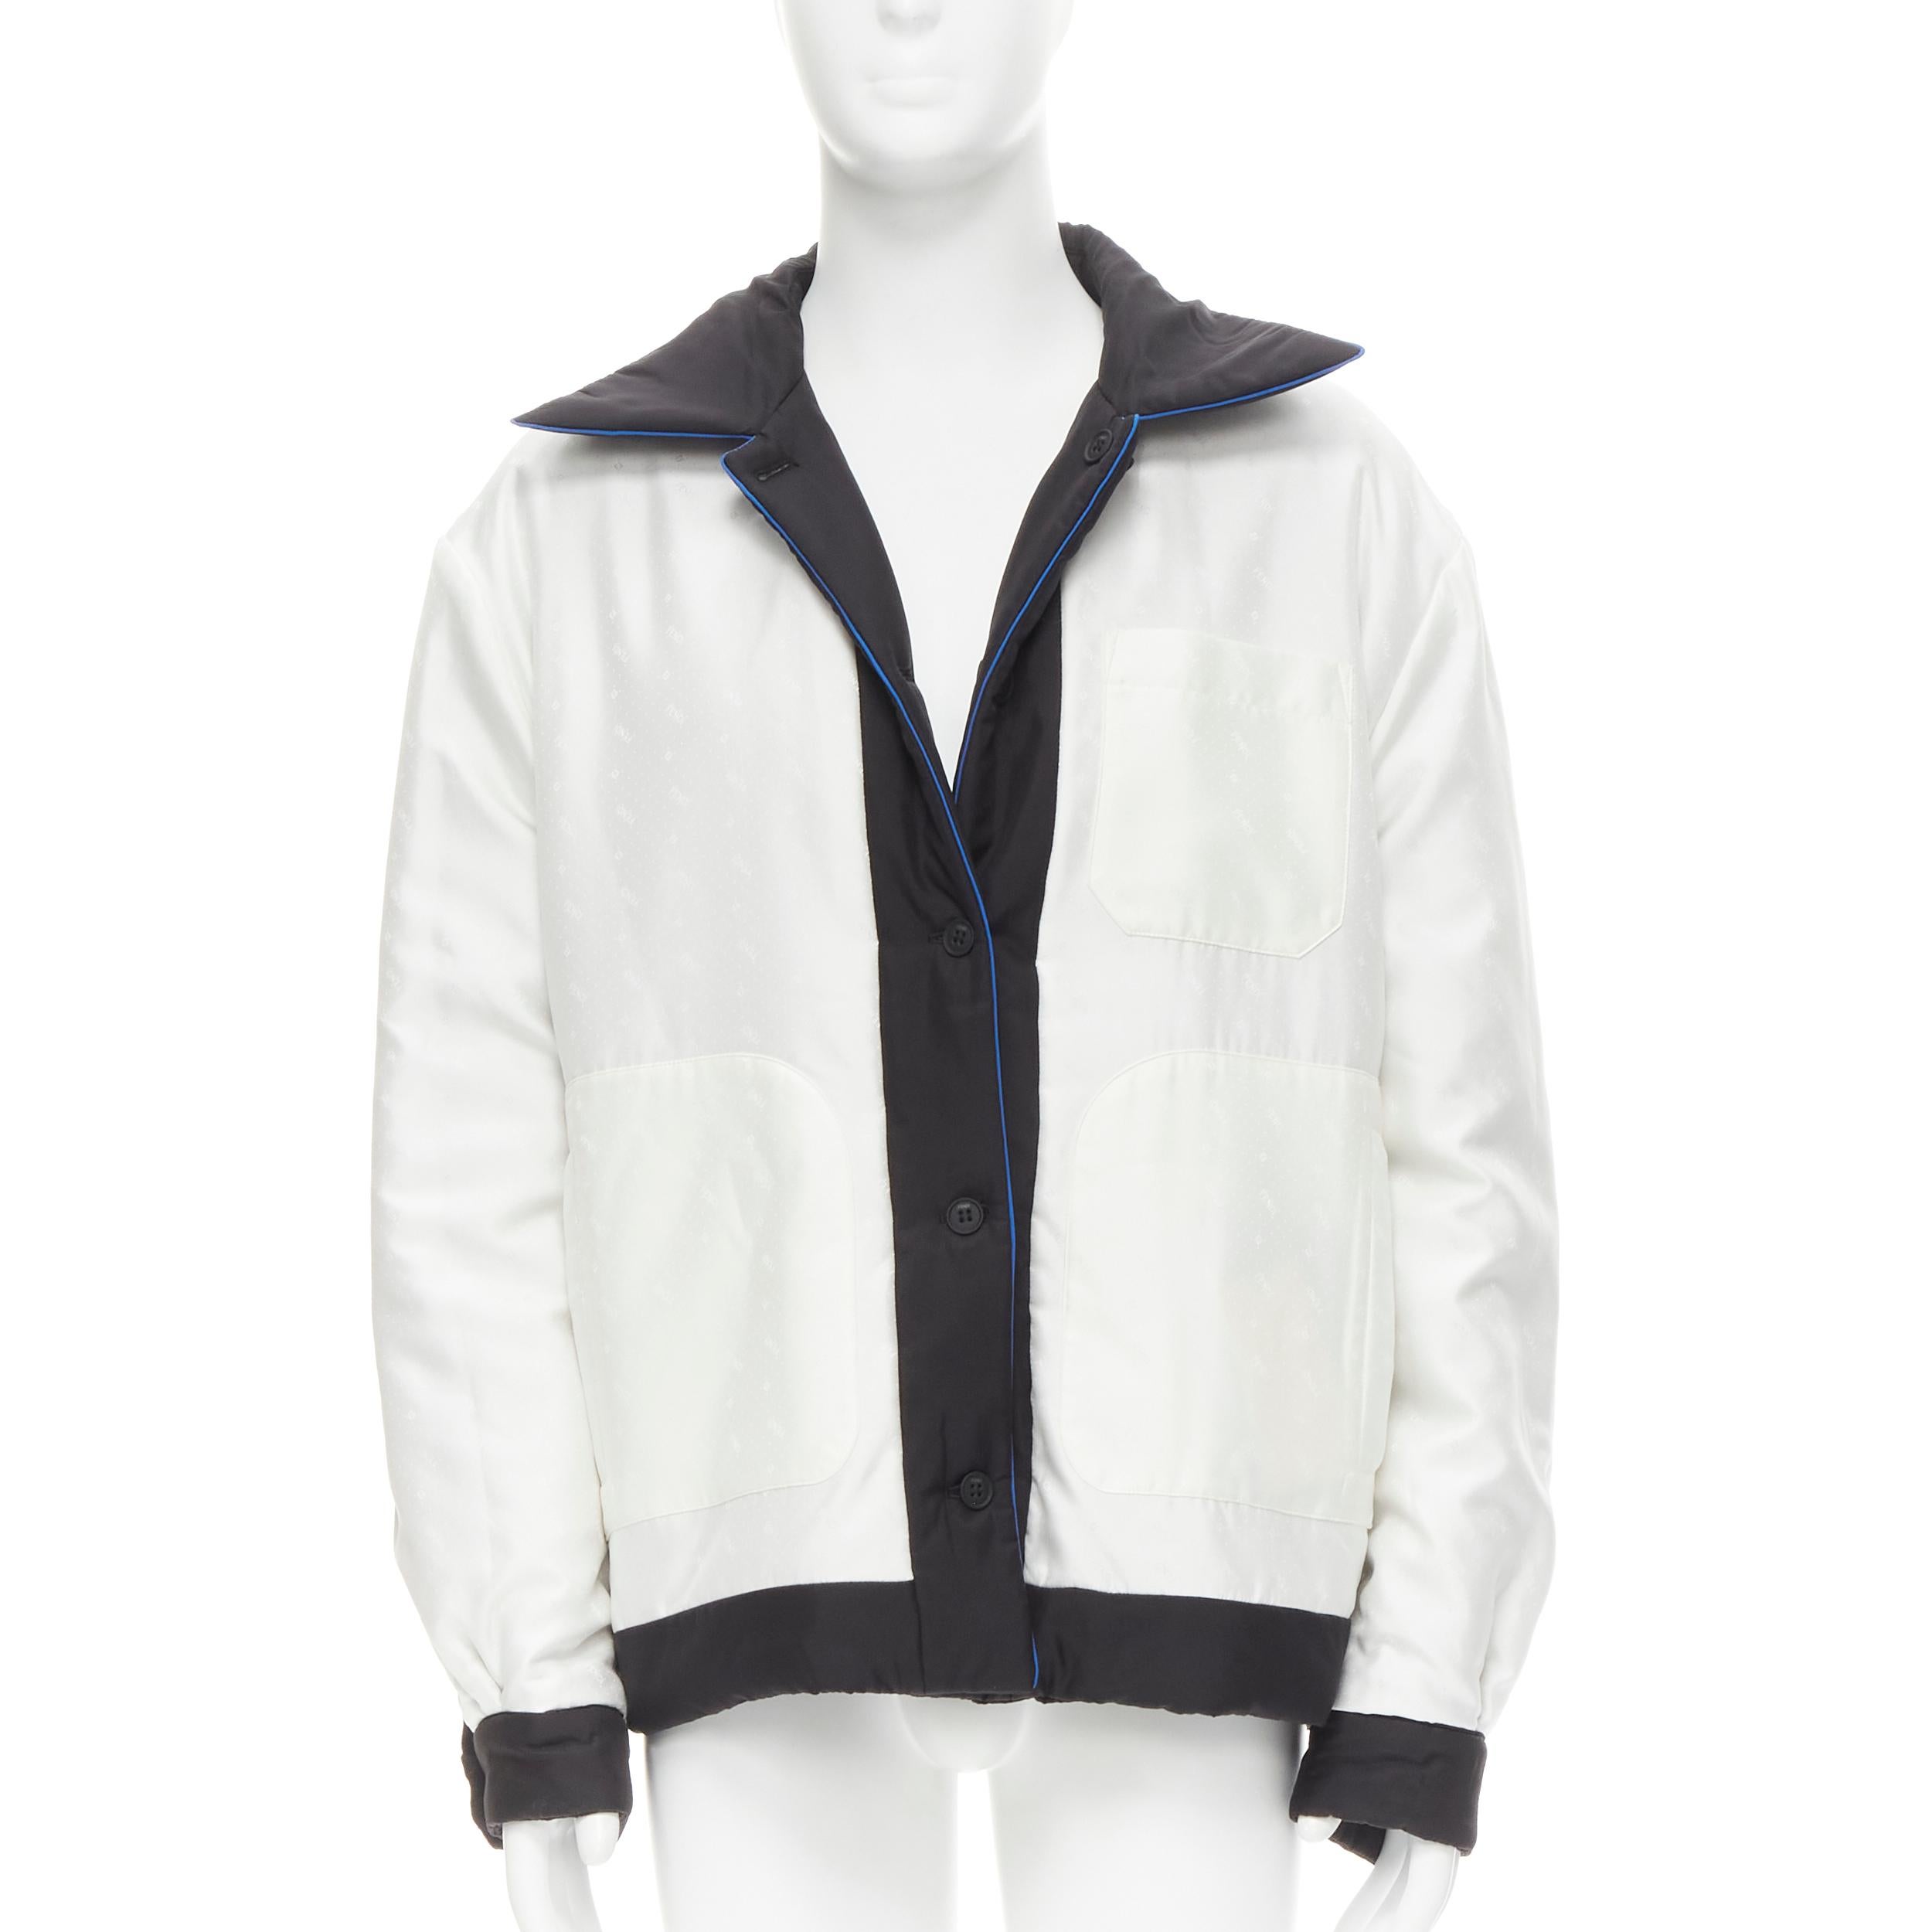 new FENDI 2021 Reversible 100% silk black white logo padded jacket IT48 M 
Reference: TGAS/C00730 
Brand: Fendi 
Material: Silk 
Color: Black 
Pattern: Solid 
Closure: Button 
Extra Detail: Reversible padded jacket. 100% silk on both sides- one side